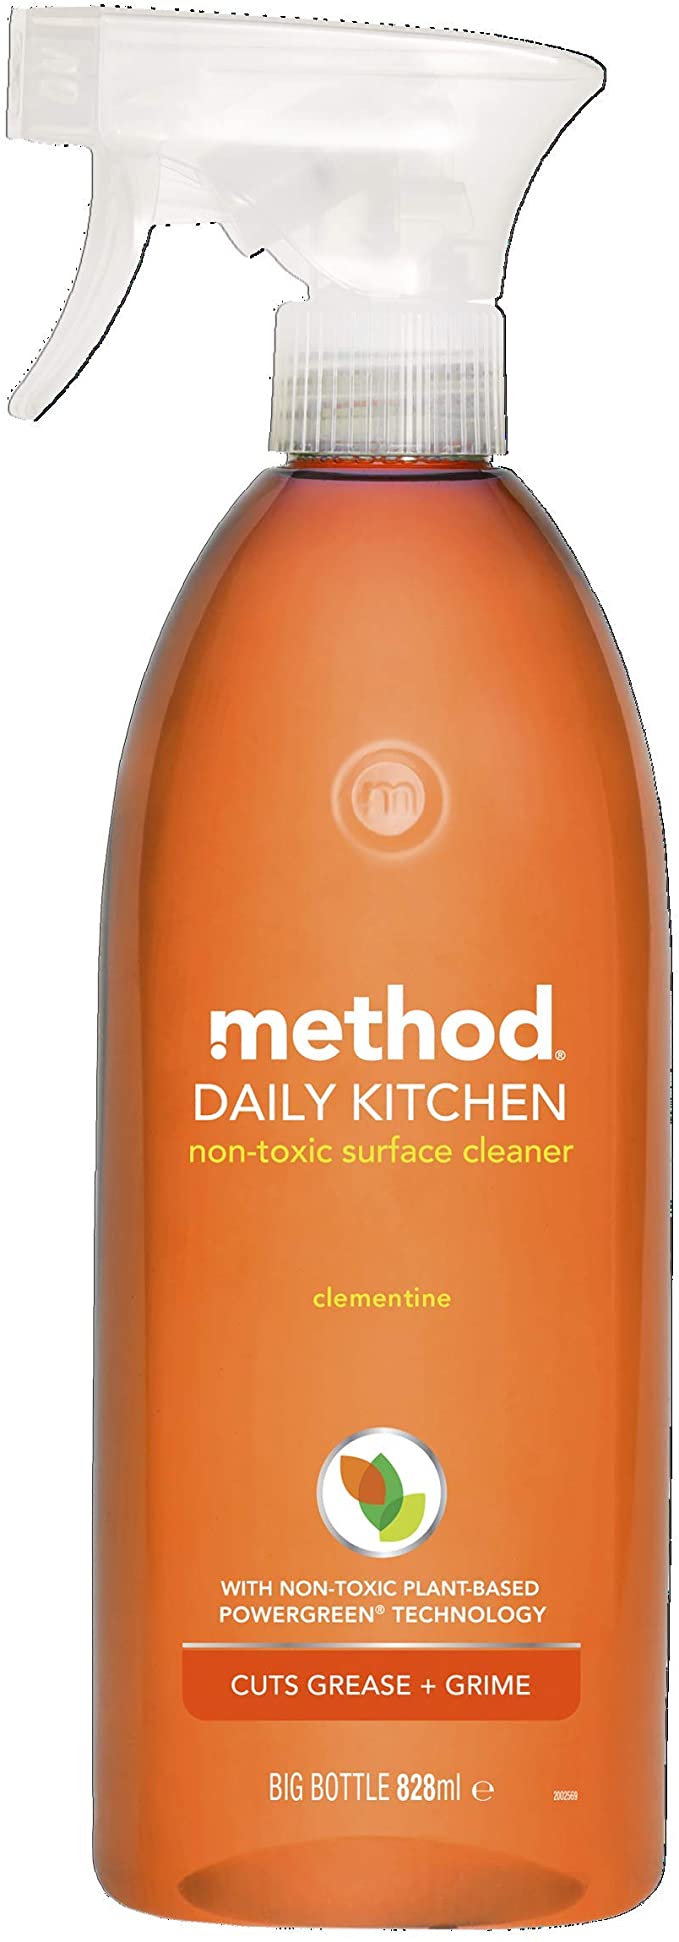 Method Daily Kitchen Surface Cleaner Clementine, 828ml